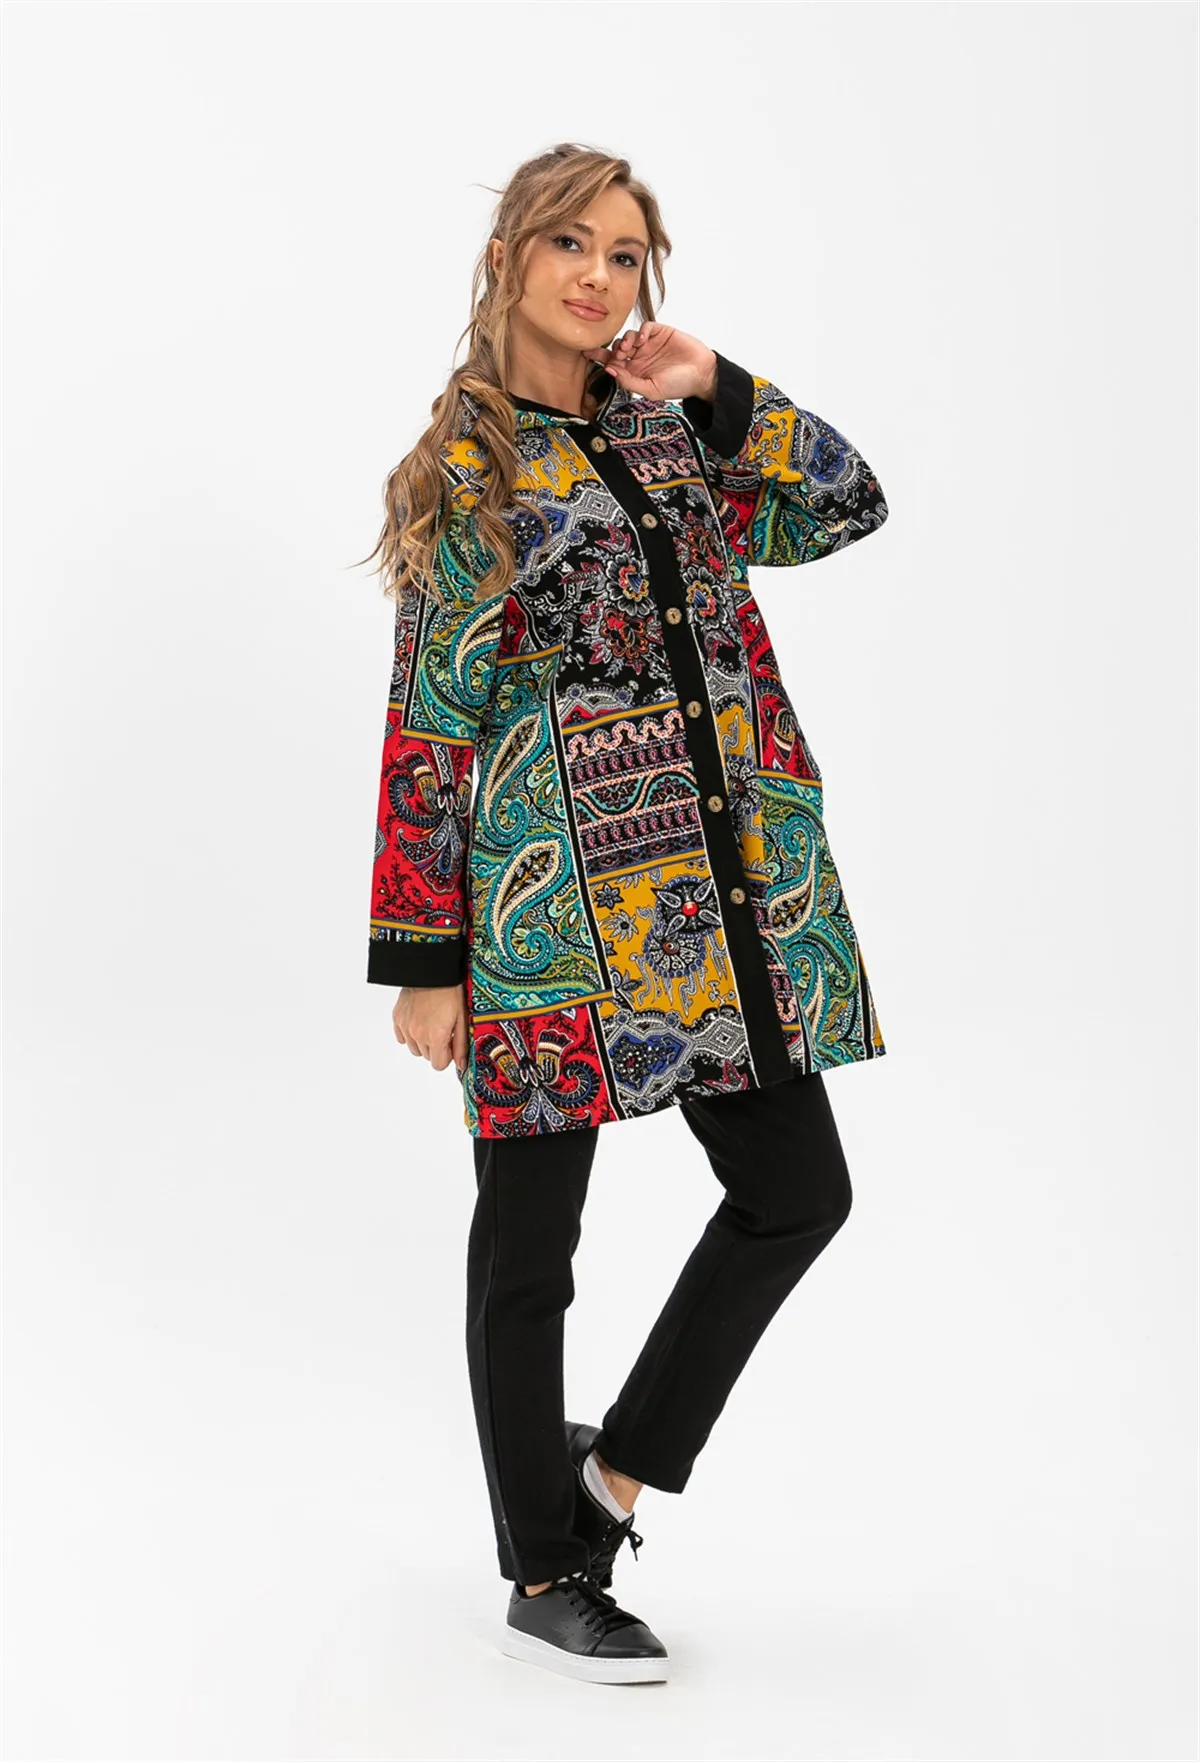 Handmade Flannel Fabric Paisley Patterned Winter Multicolor Hooded Women's Jacket 2022 New Fashion Outwear hand embroidered collar tassel detail woven flannel fabric short thick winter dress 2022 new fashion women s clothing 6 colors